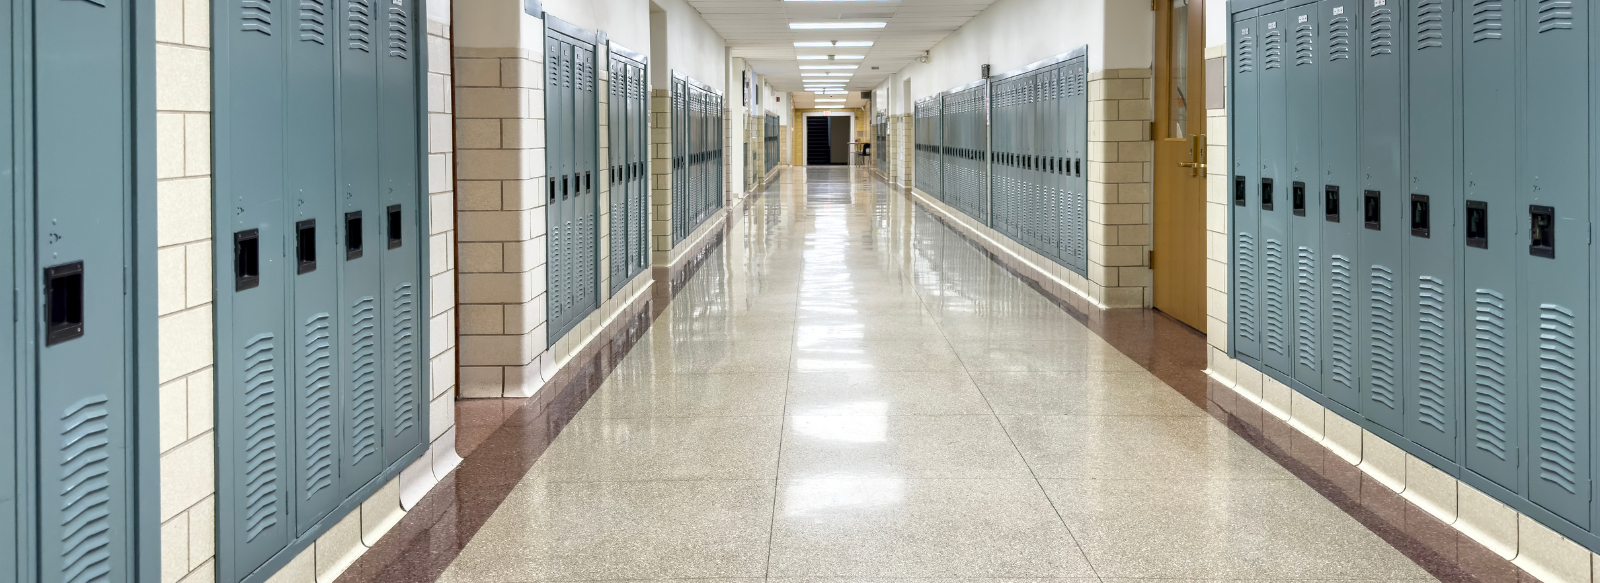 long hallway with blue lockers on both sides